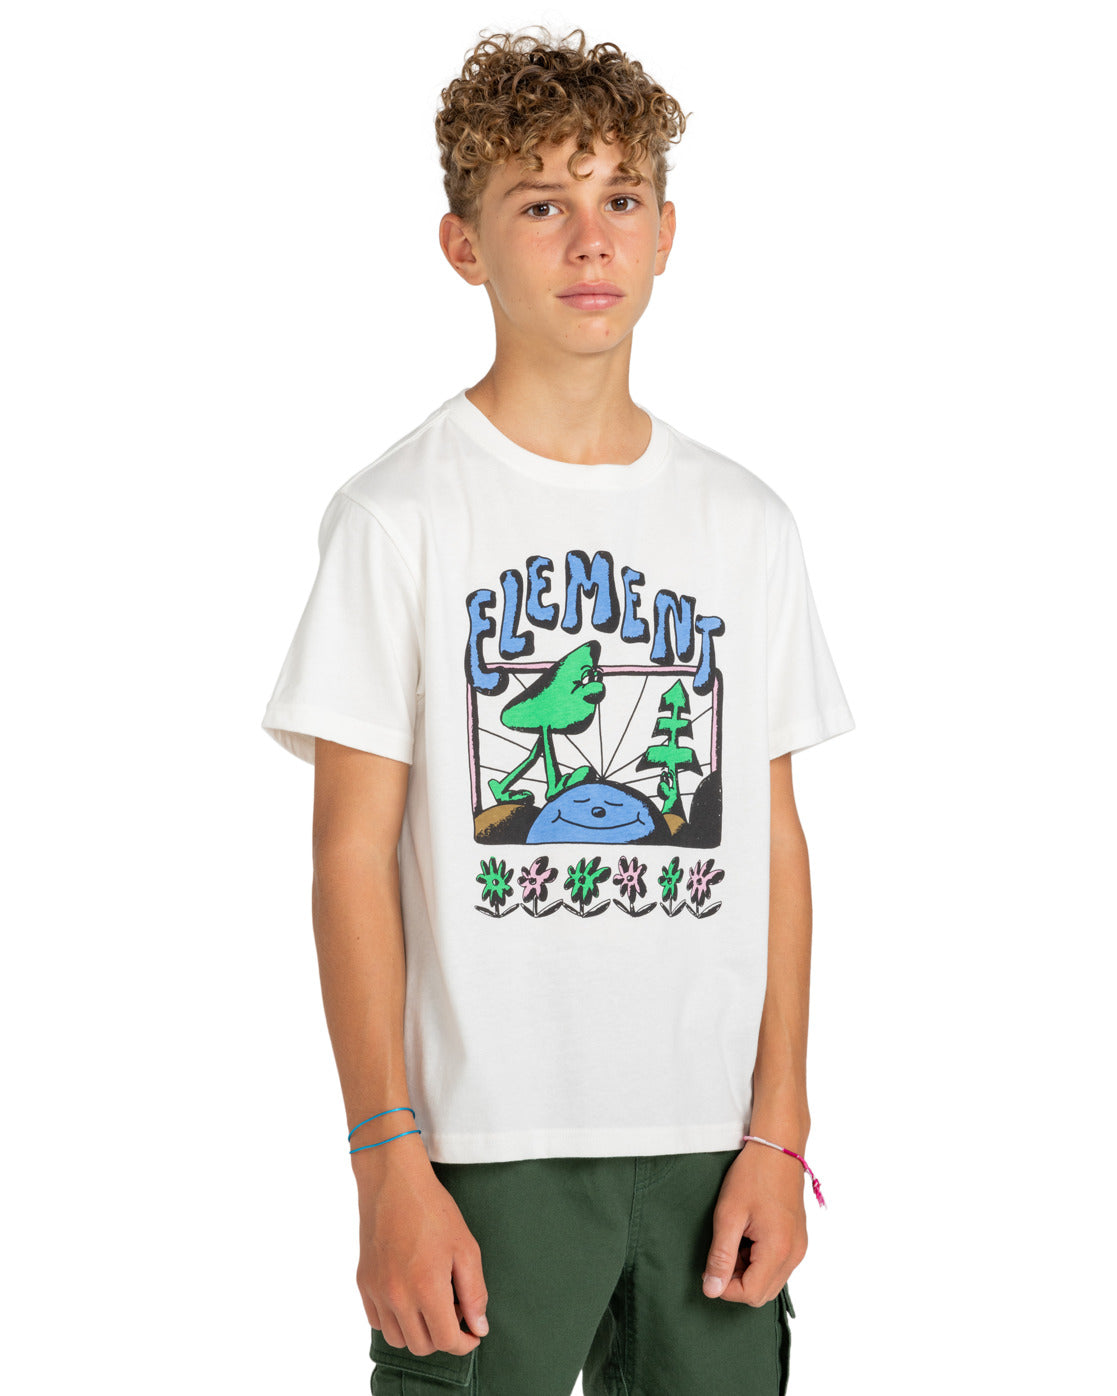 ELEMENT - QUIET SS YOUTH TEE - EGRET